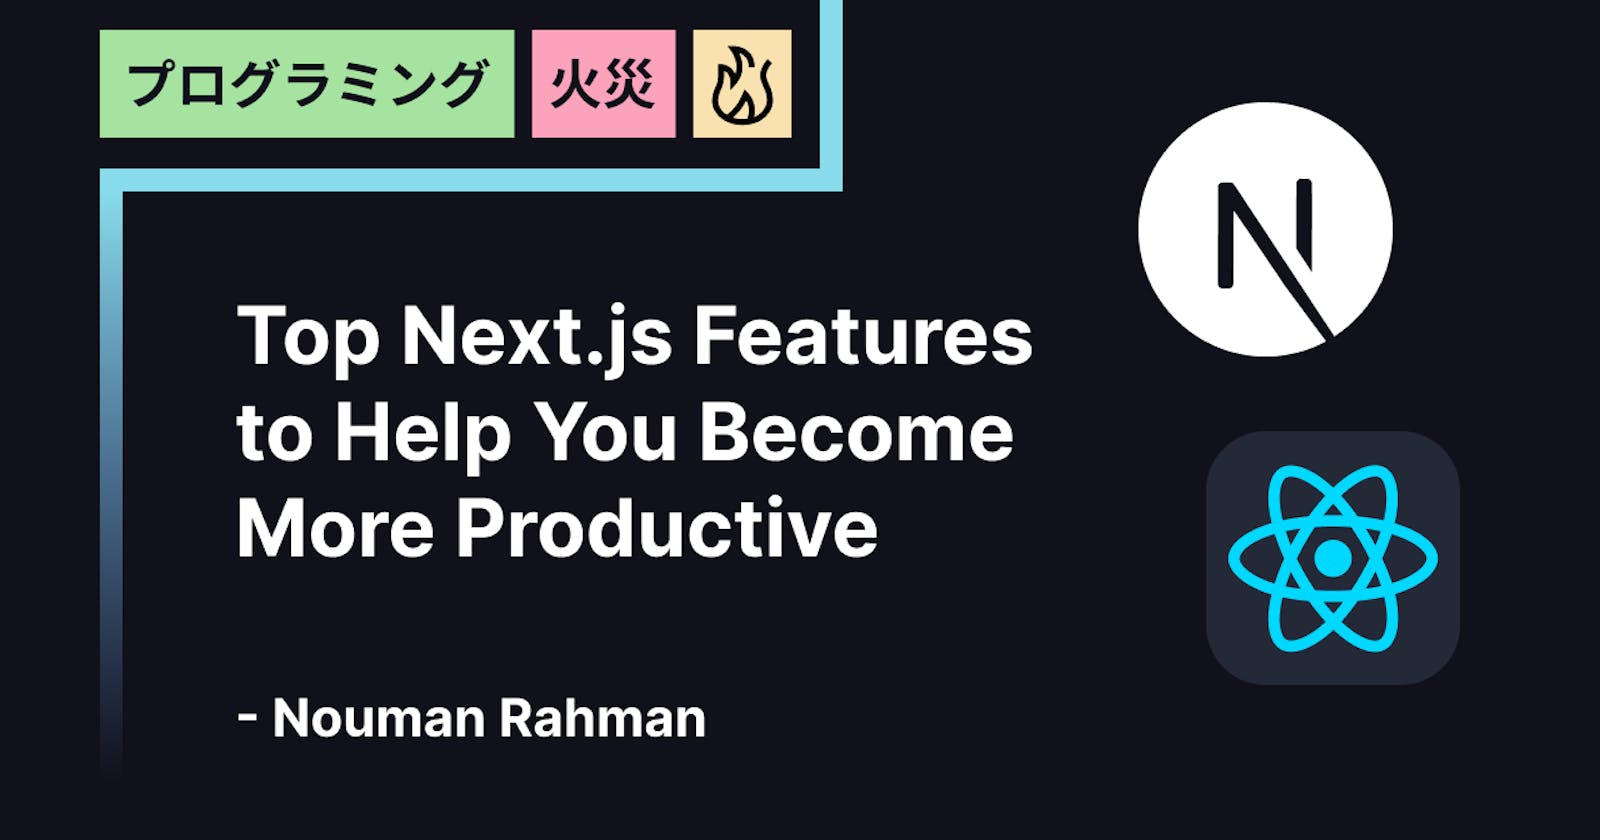 Top Next.js Features to Help You Become More Productive